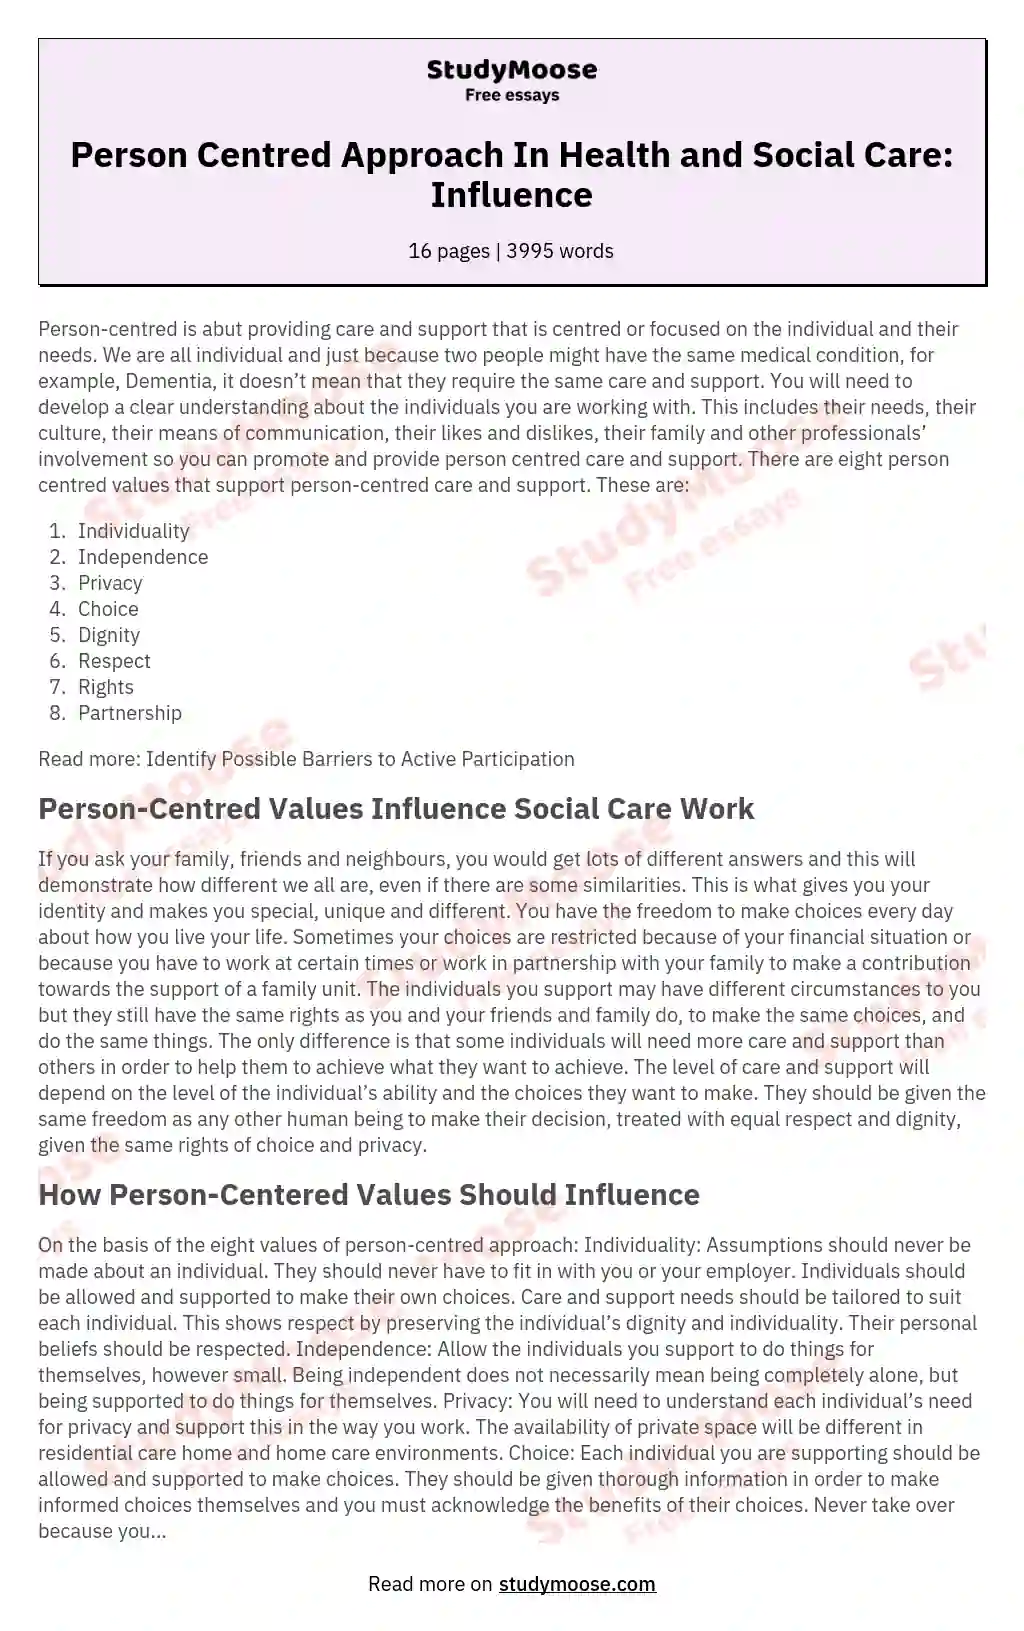 Person Centred Approach In Health and Social Care: Influence